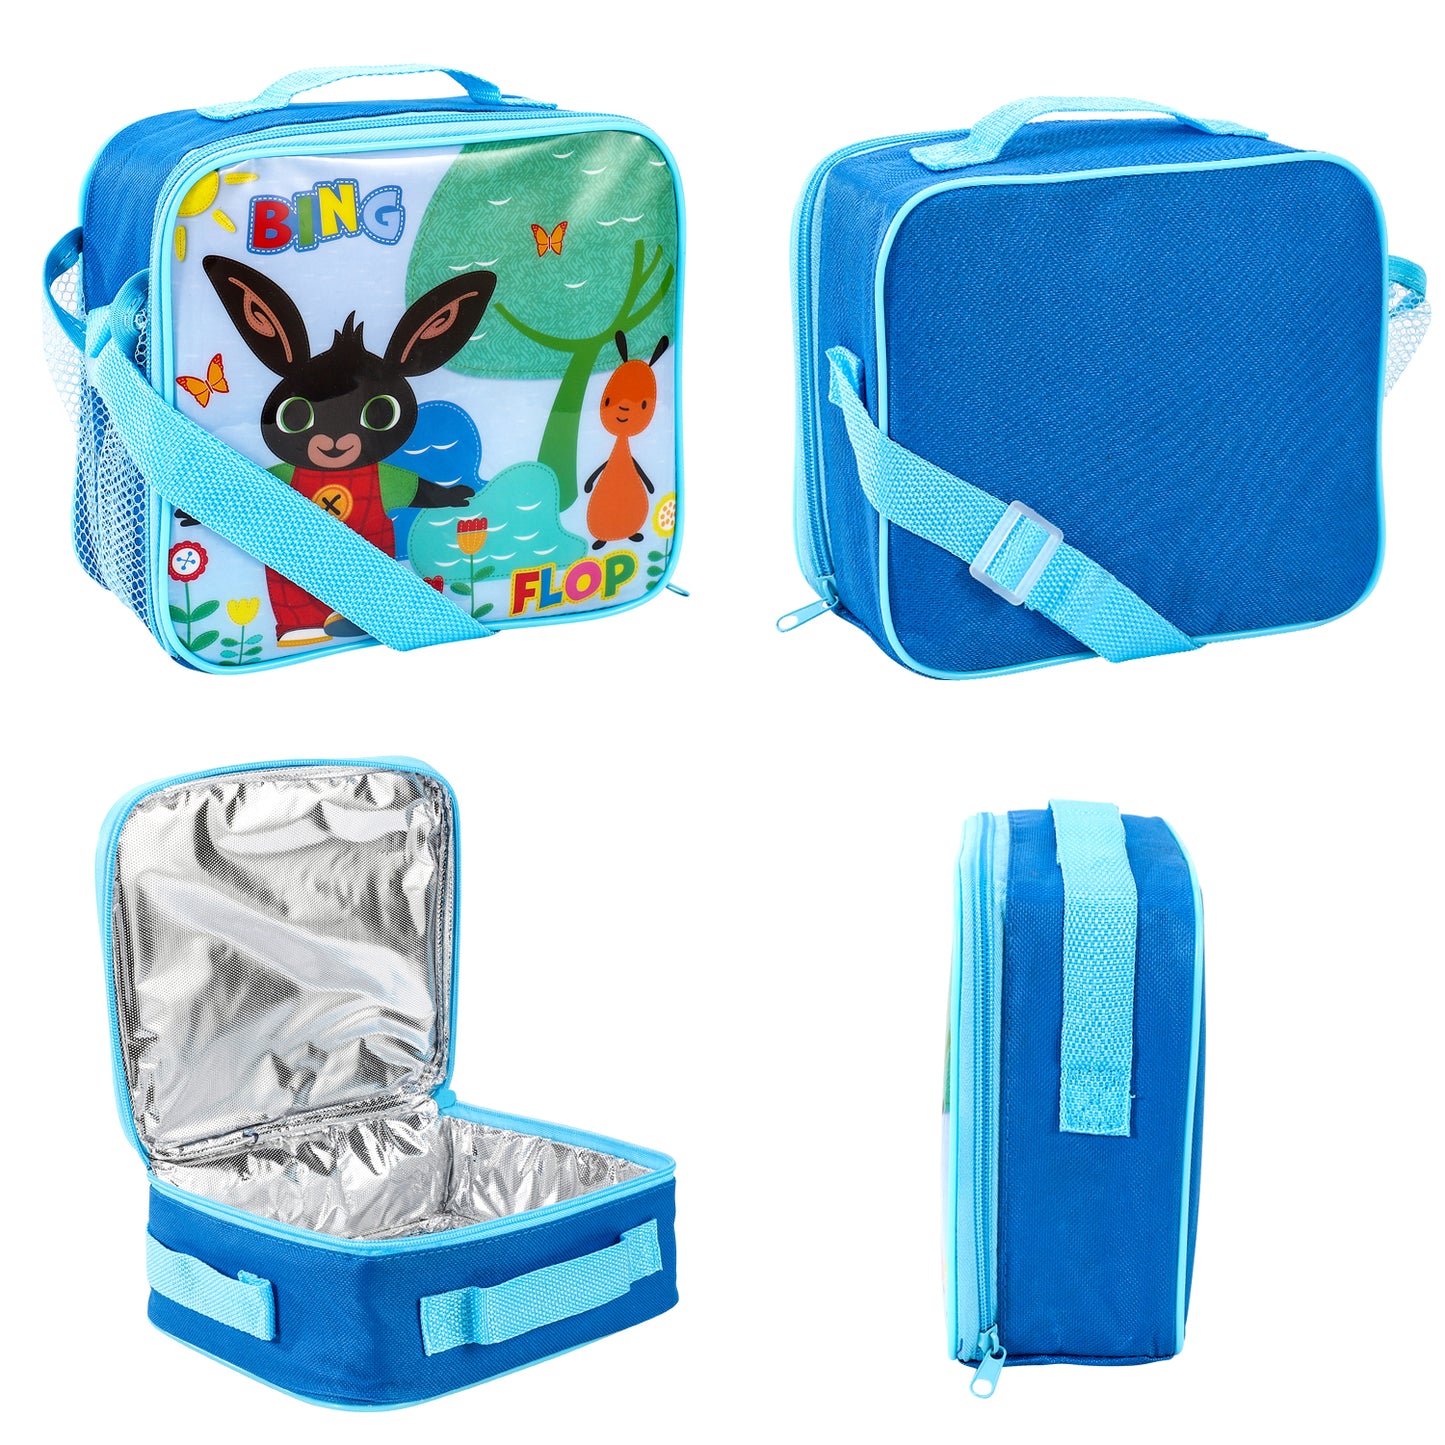 Bing Bunny Children’s Insulated Lunch Bag